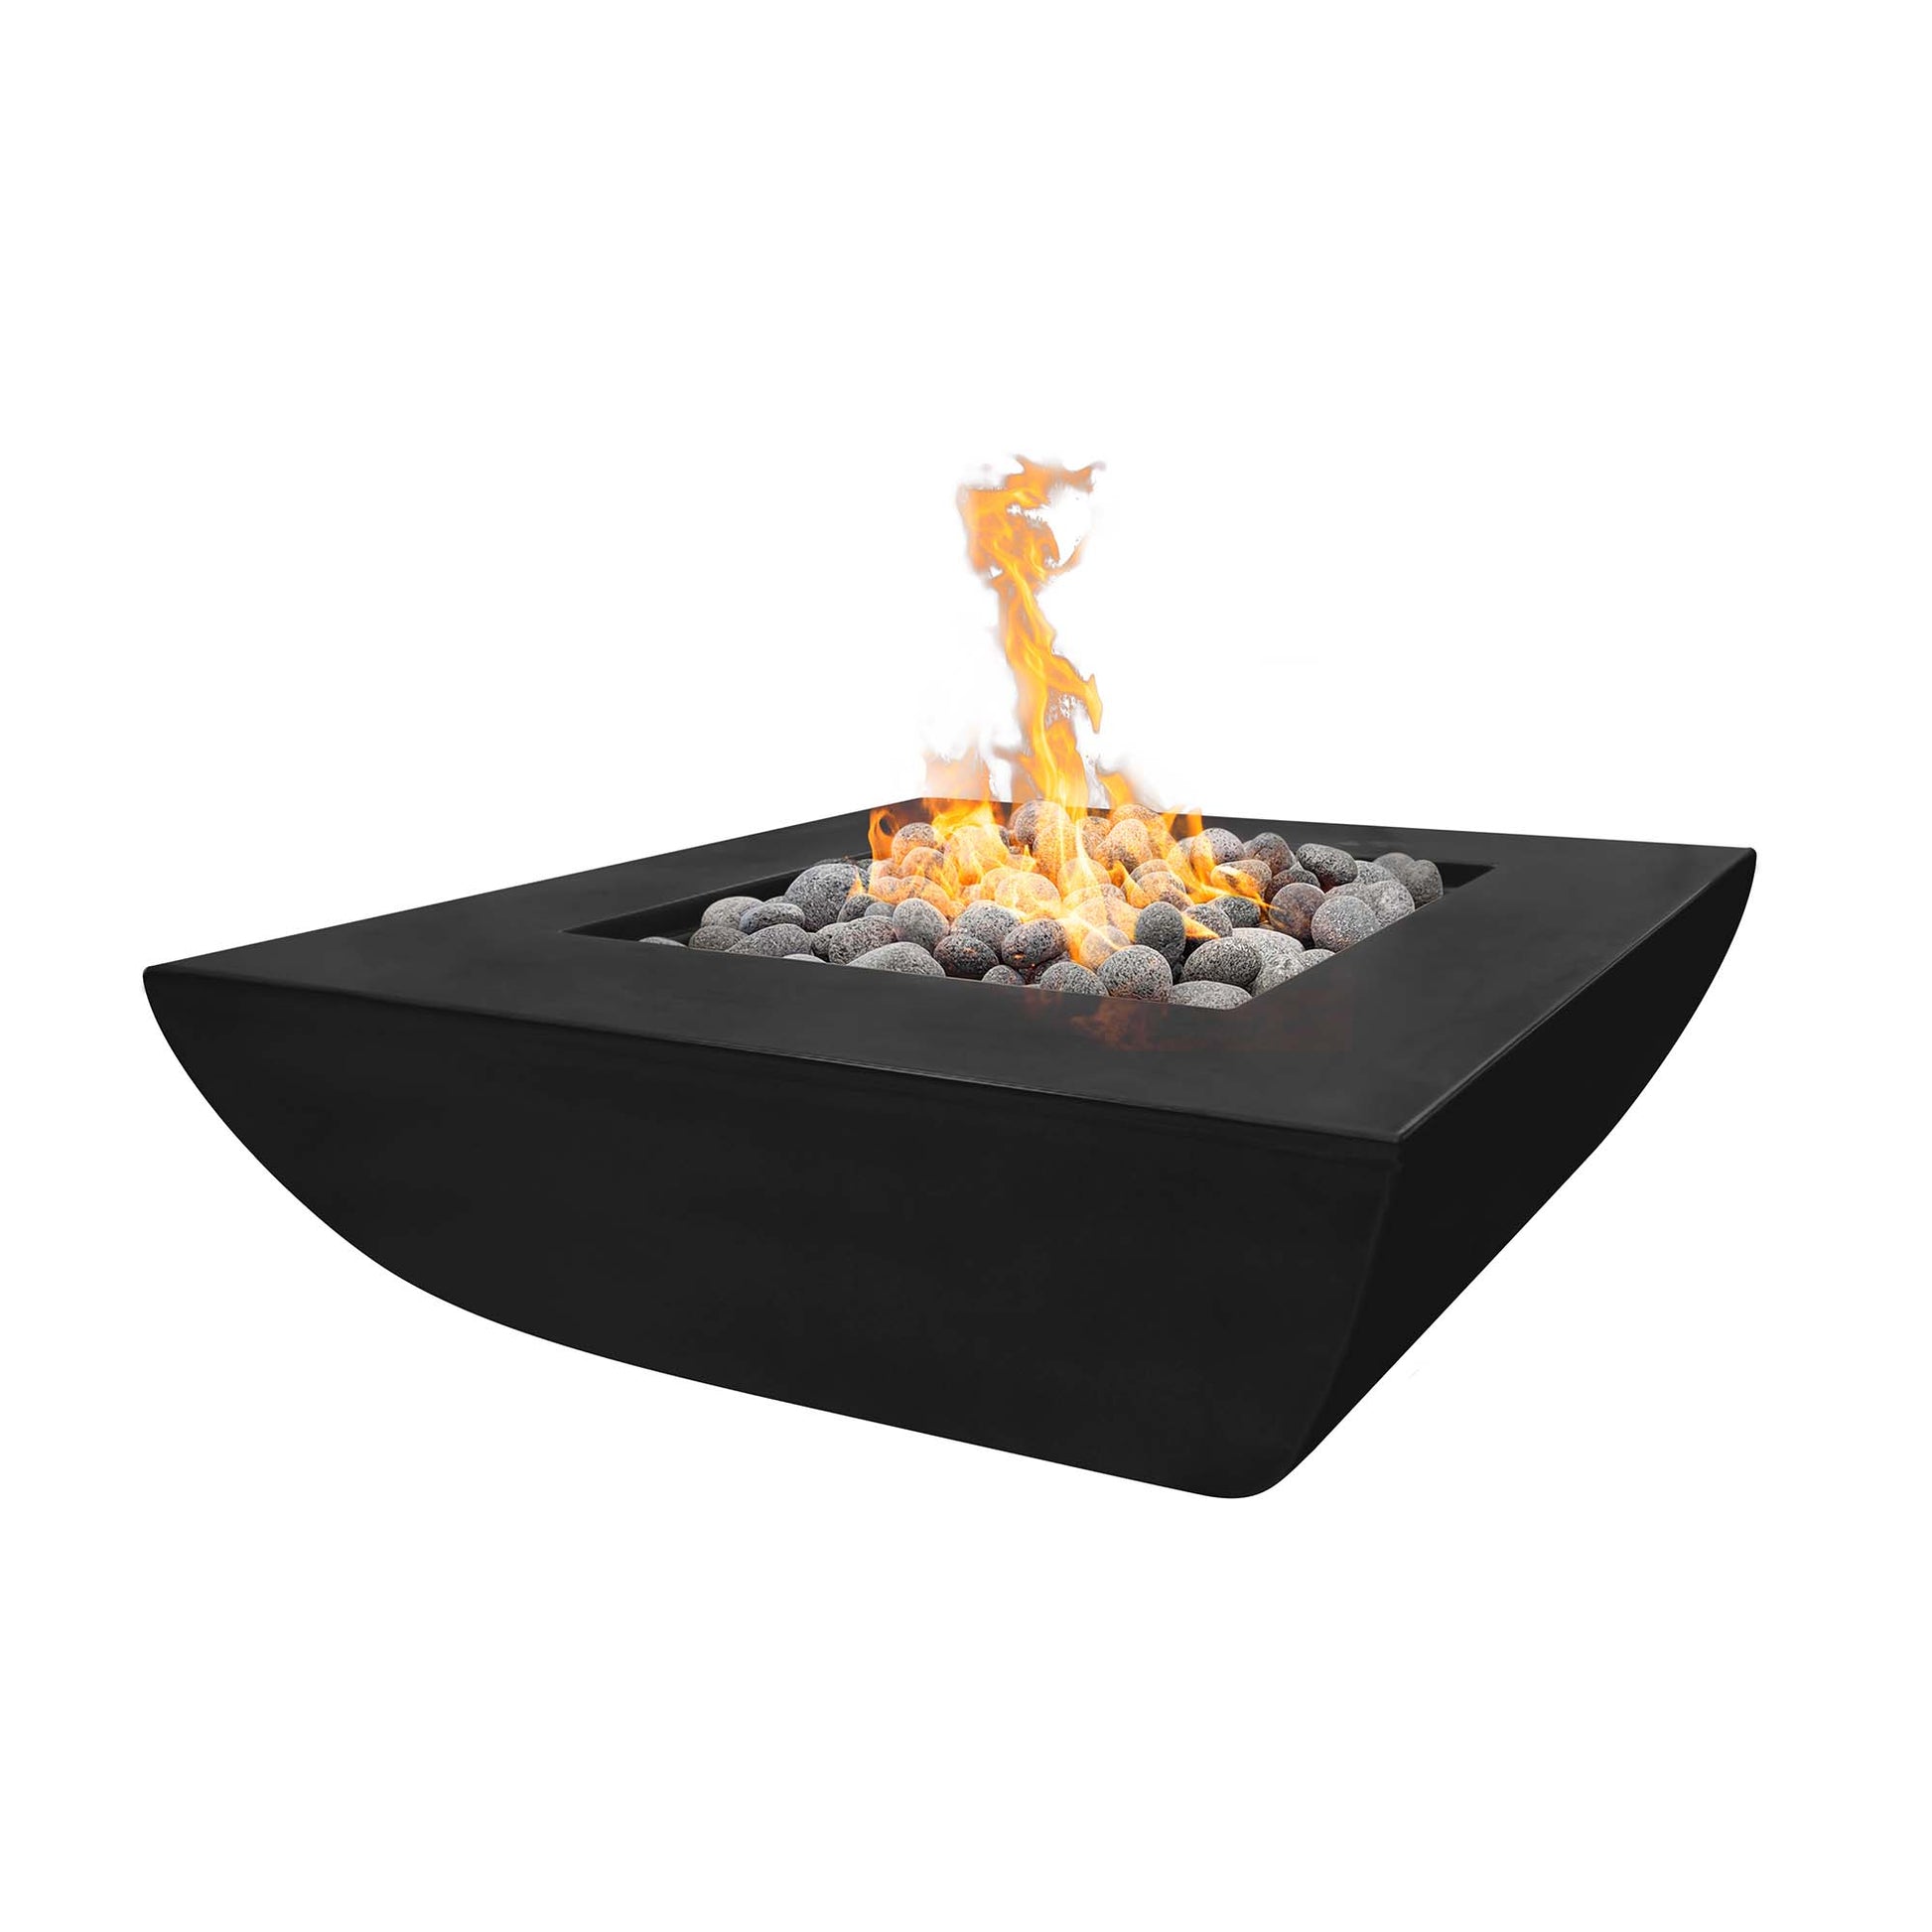 The Outdoor Plus Square Avalon 42" Metallic Silver GFRC Concrete Liquid Propane Fire Pit with Flame Sense with Spark Ignition